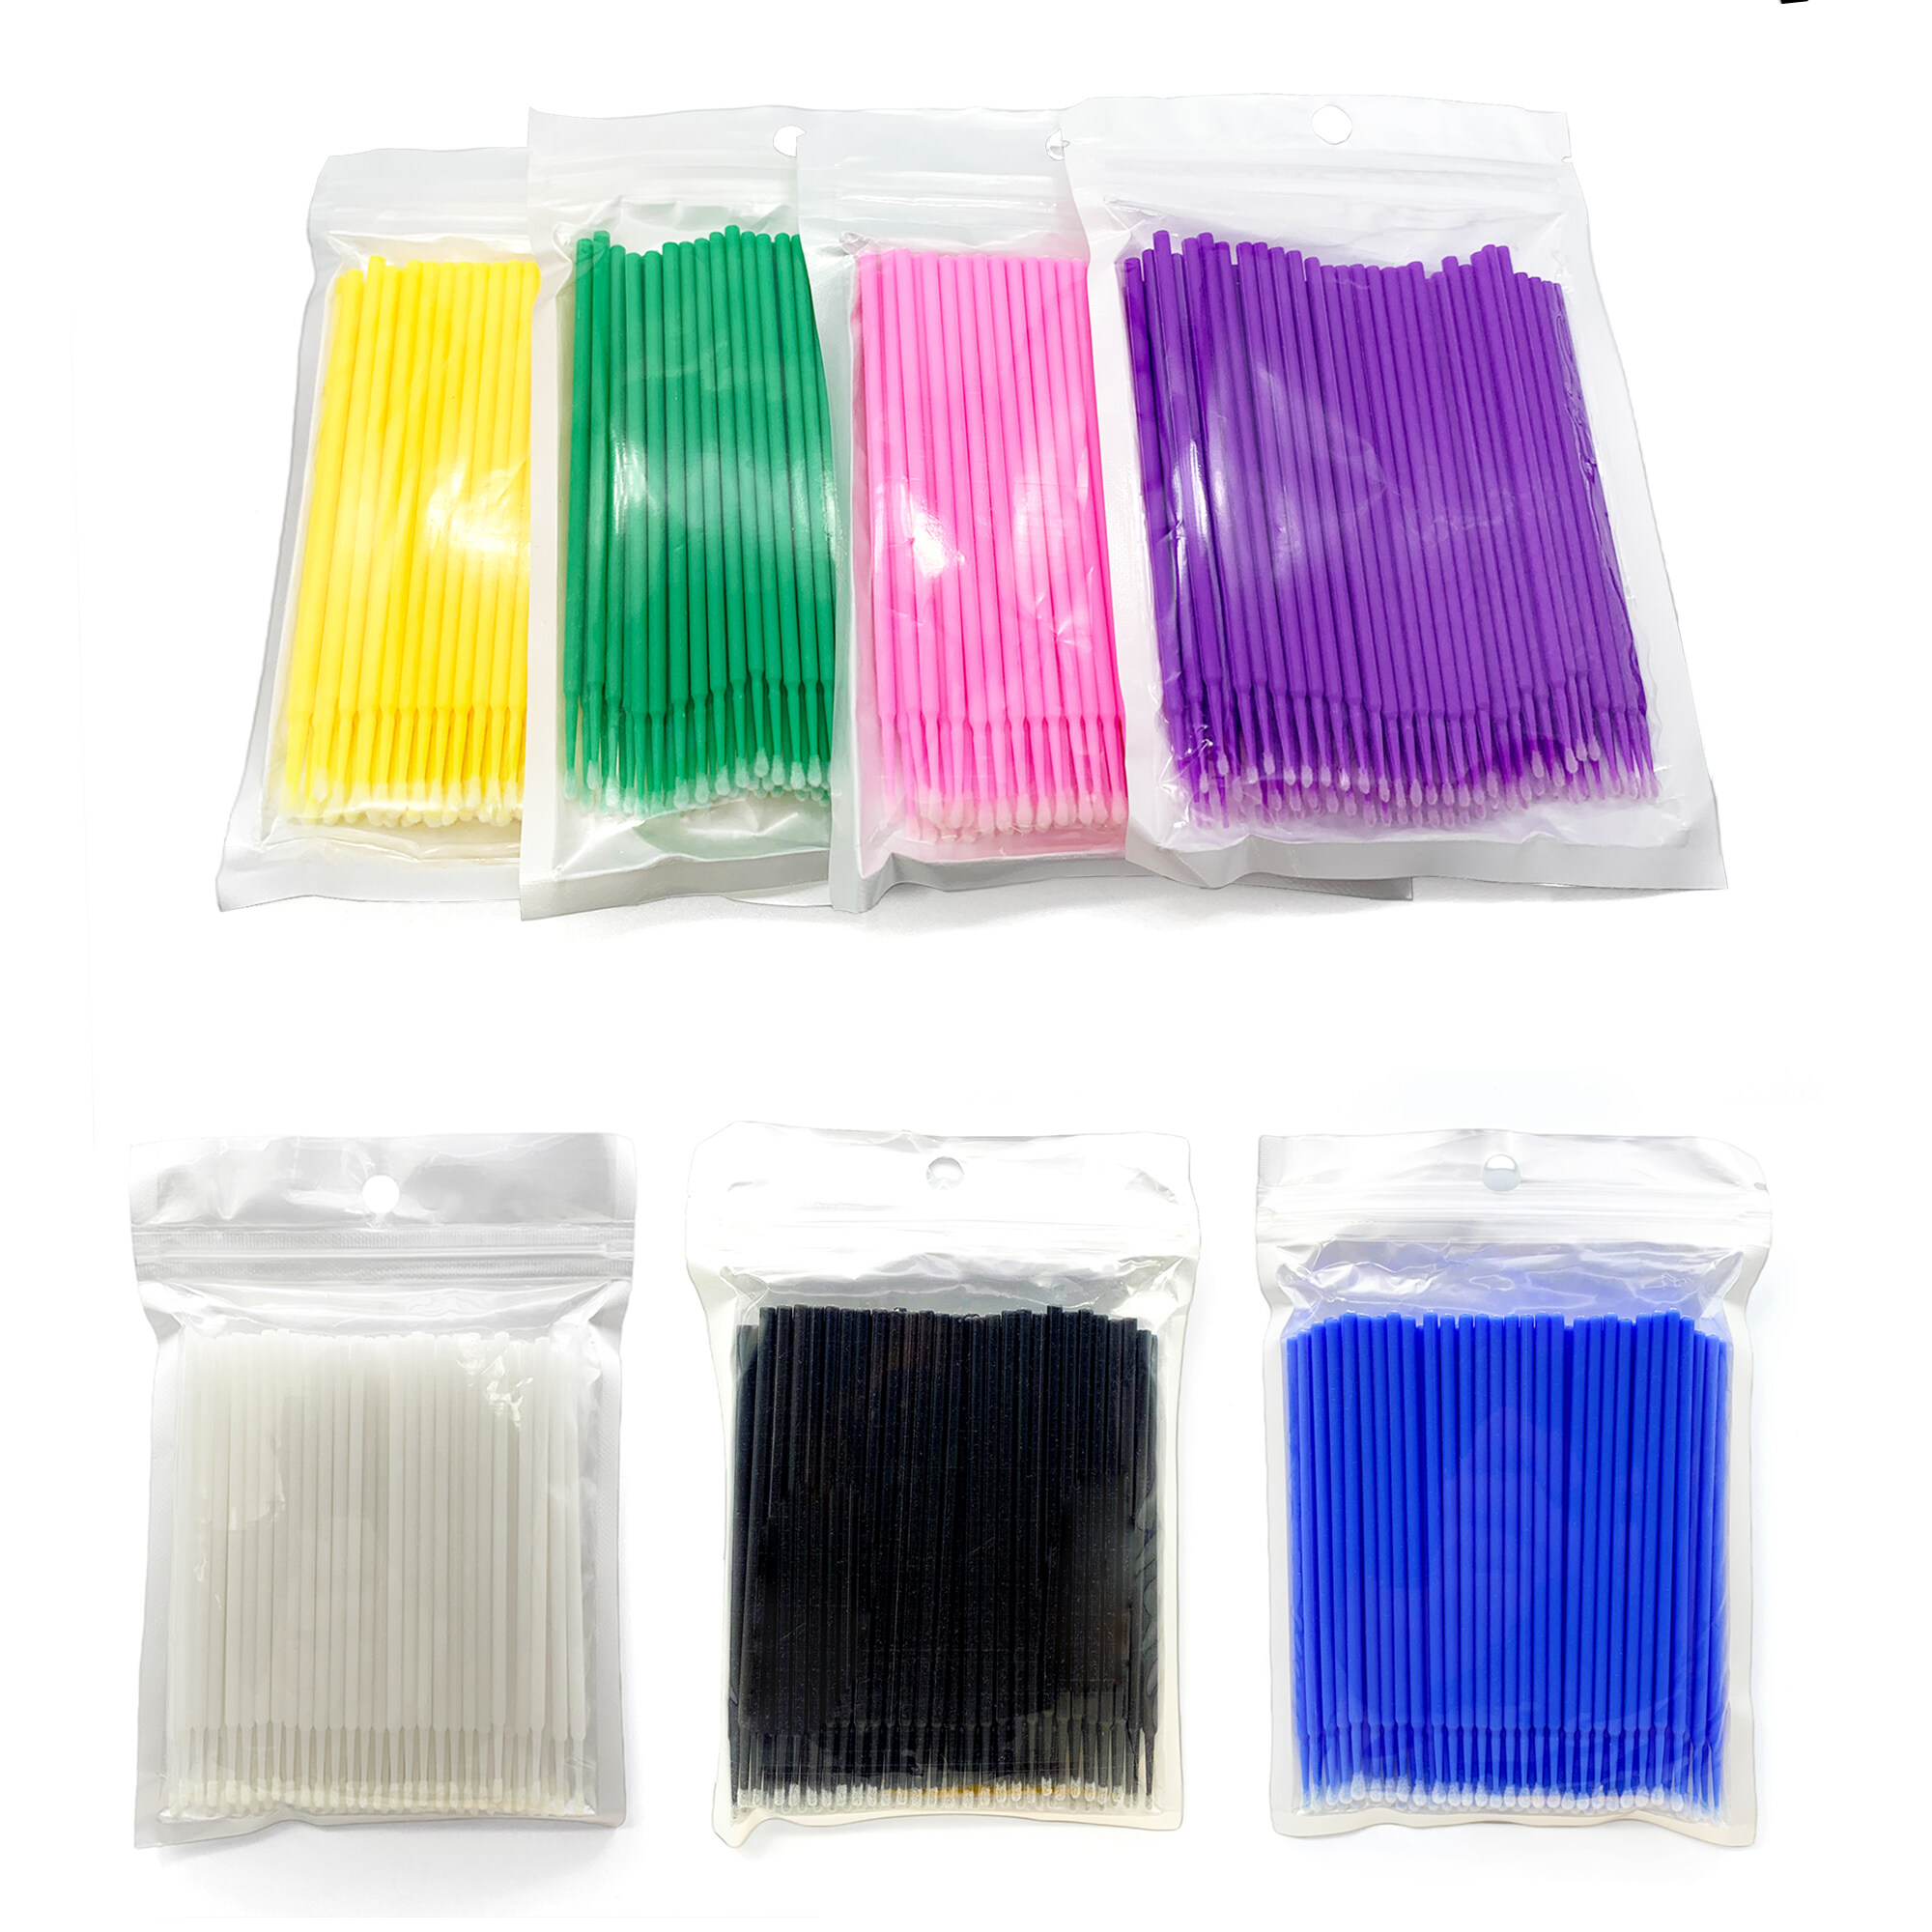 100PCS Disposable Colorful Cotton Swabs MicroBrush Eyelashes Extension